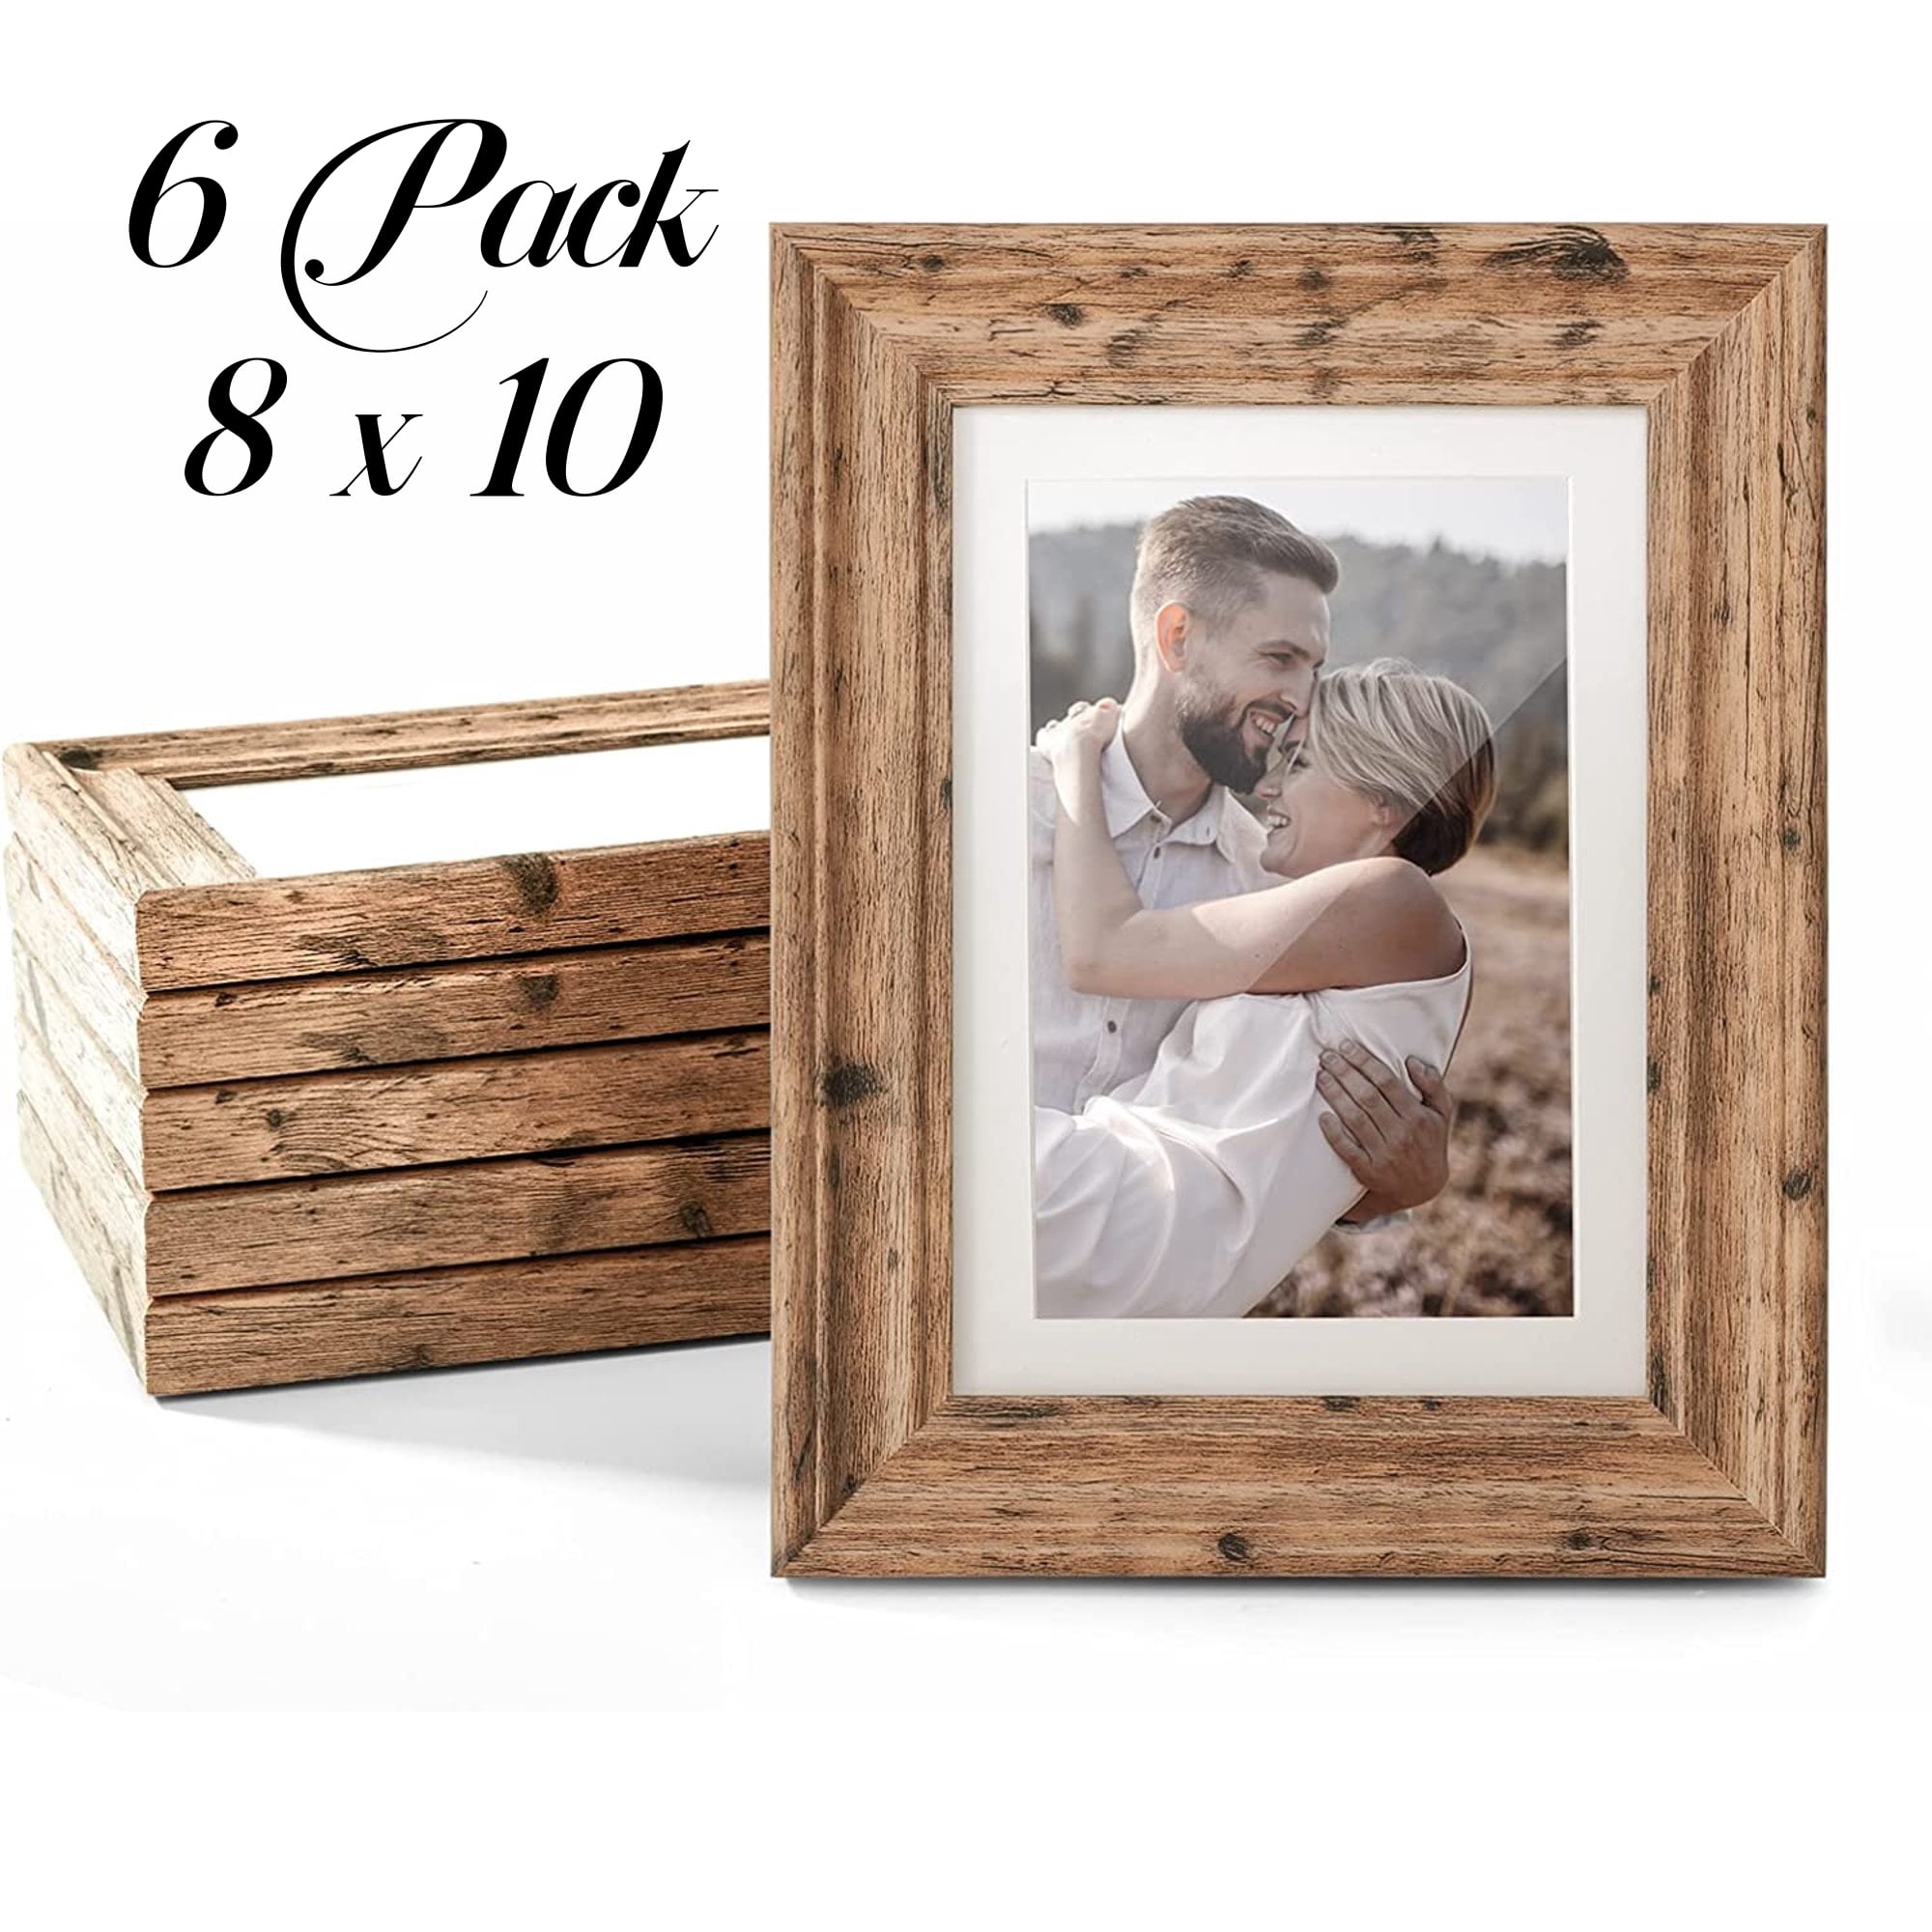 Metronic Picture Frames 16x20 Set of 6 - Distressed White